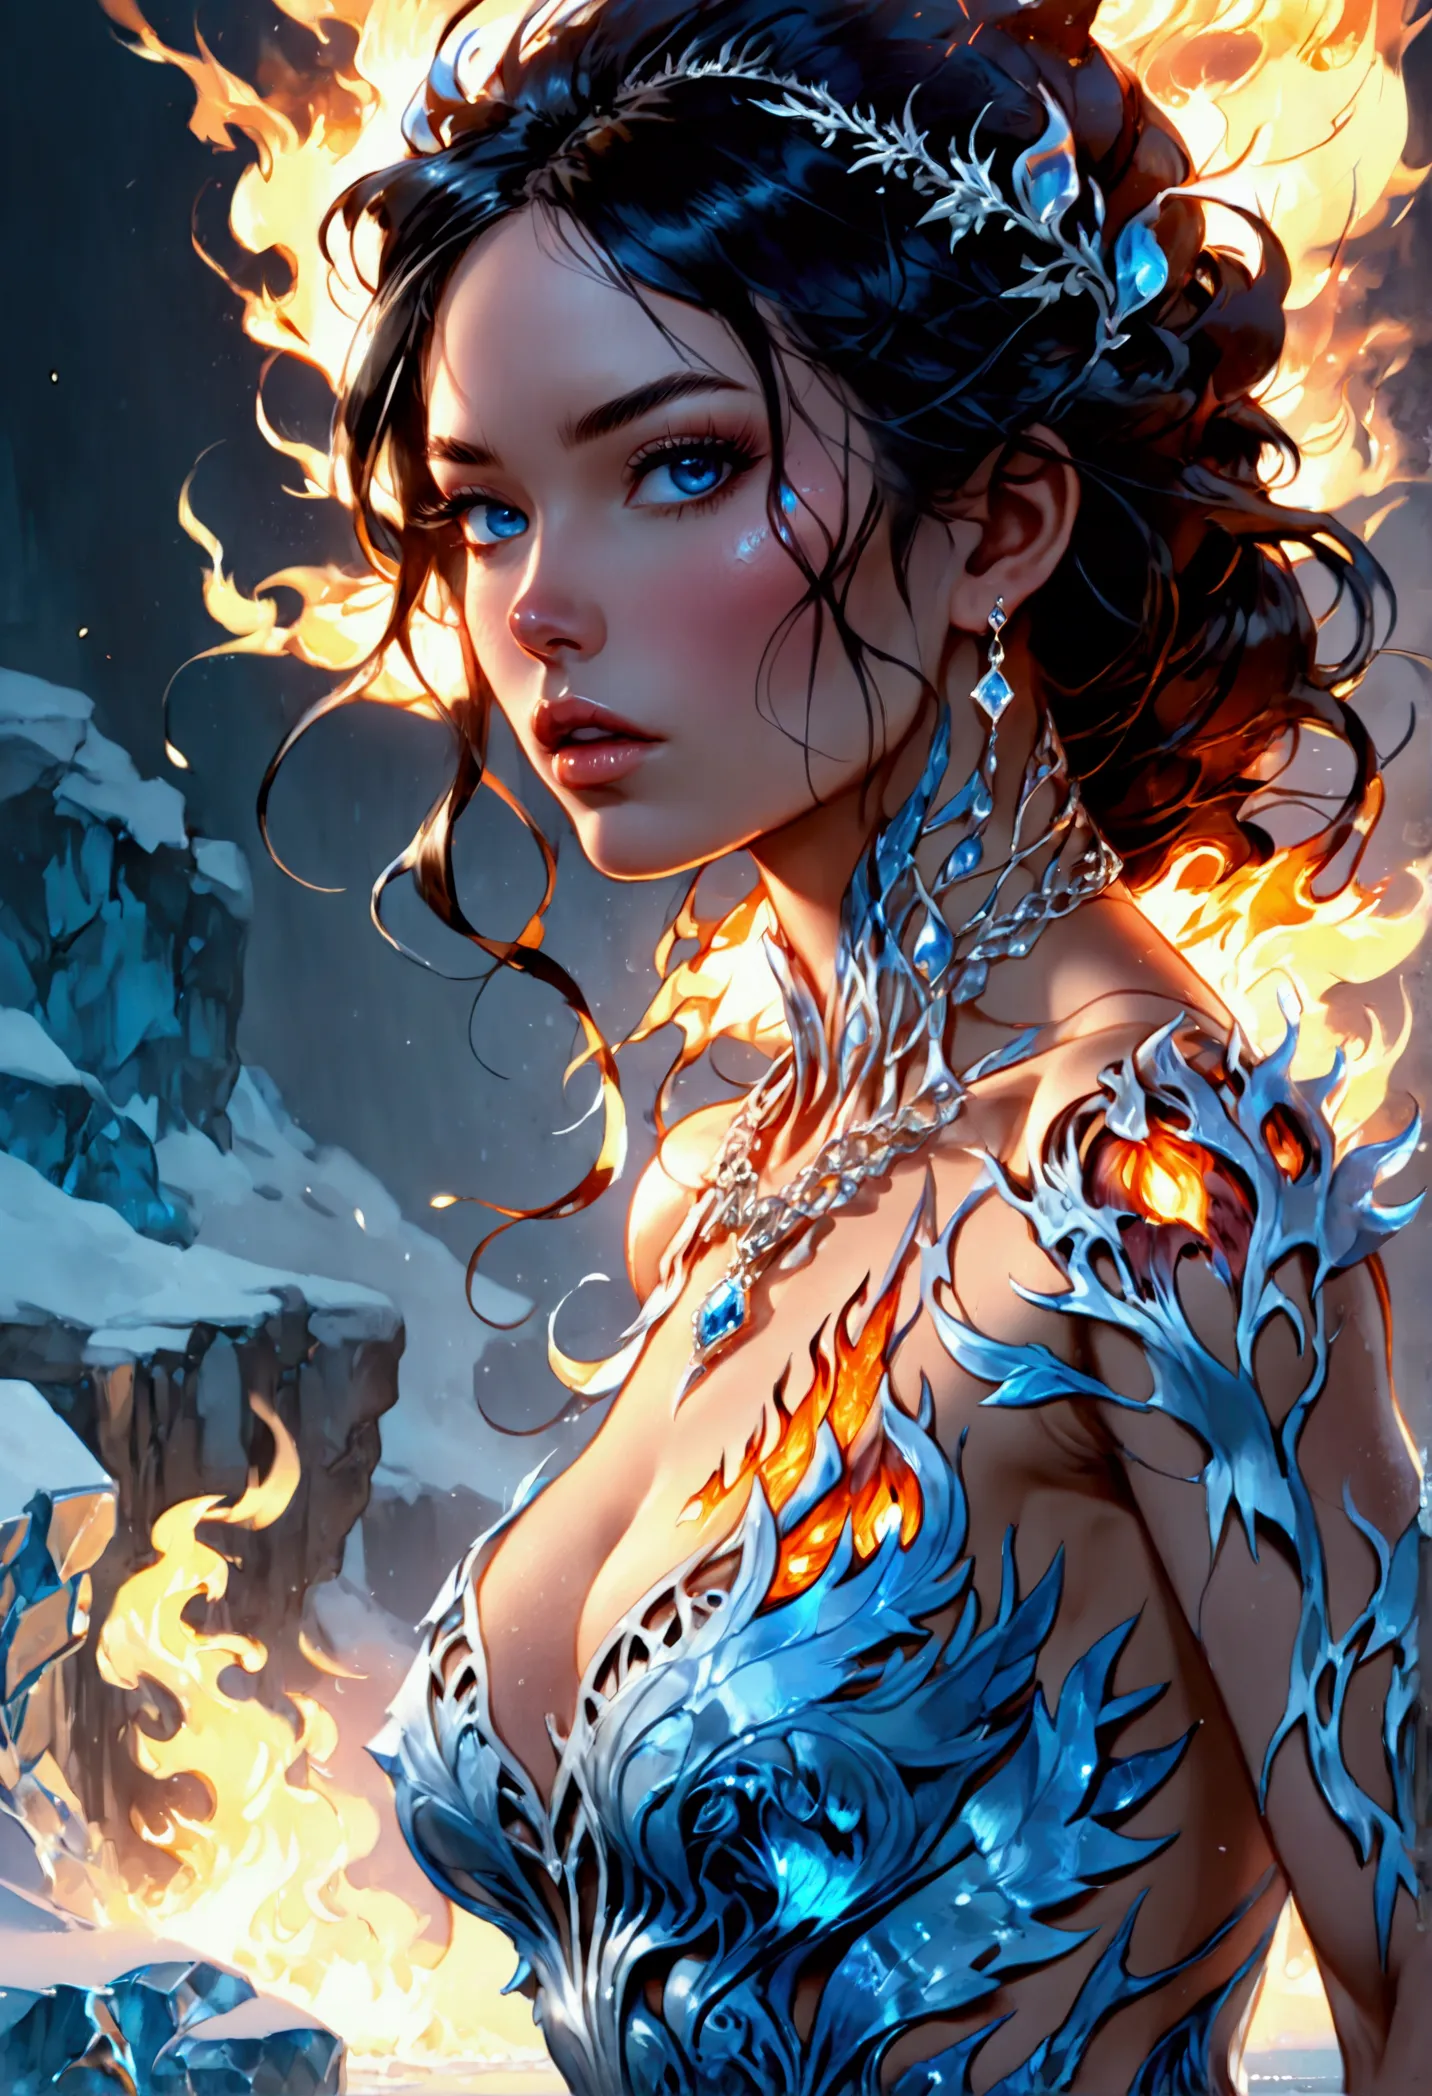 a glamour picture shot, of an elite model covered in fire walking on a icy catwalk, an extraordinary glamourous elite female mod...